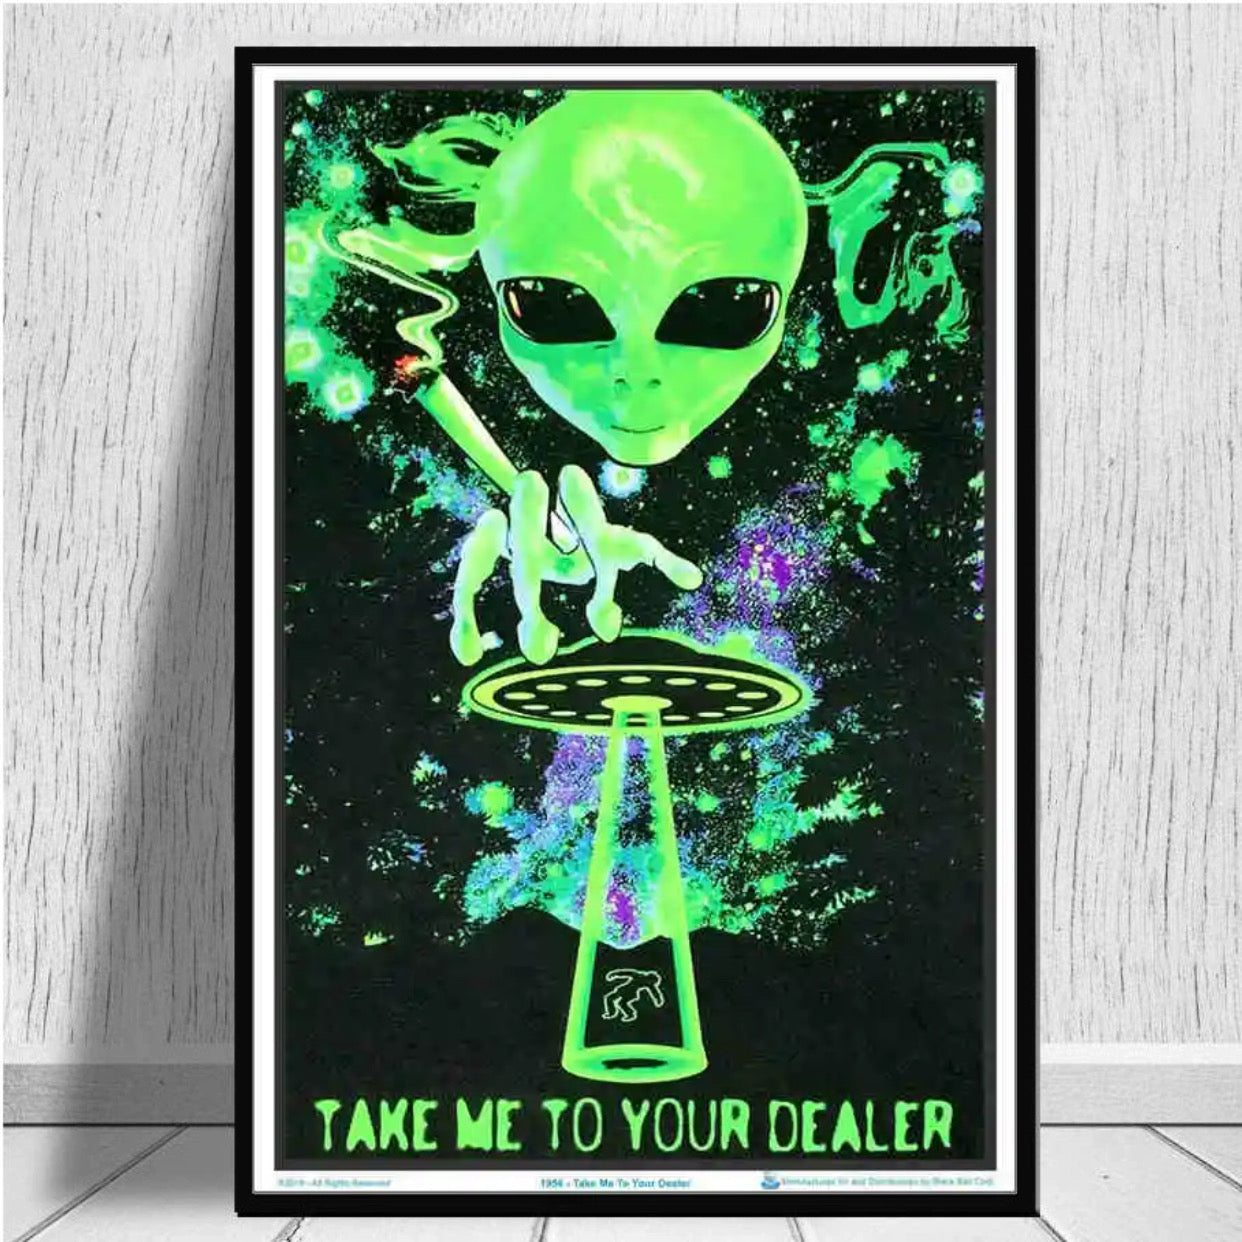 "take me to your dealer" poster